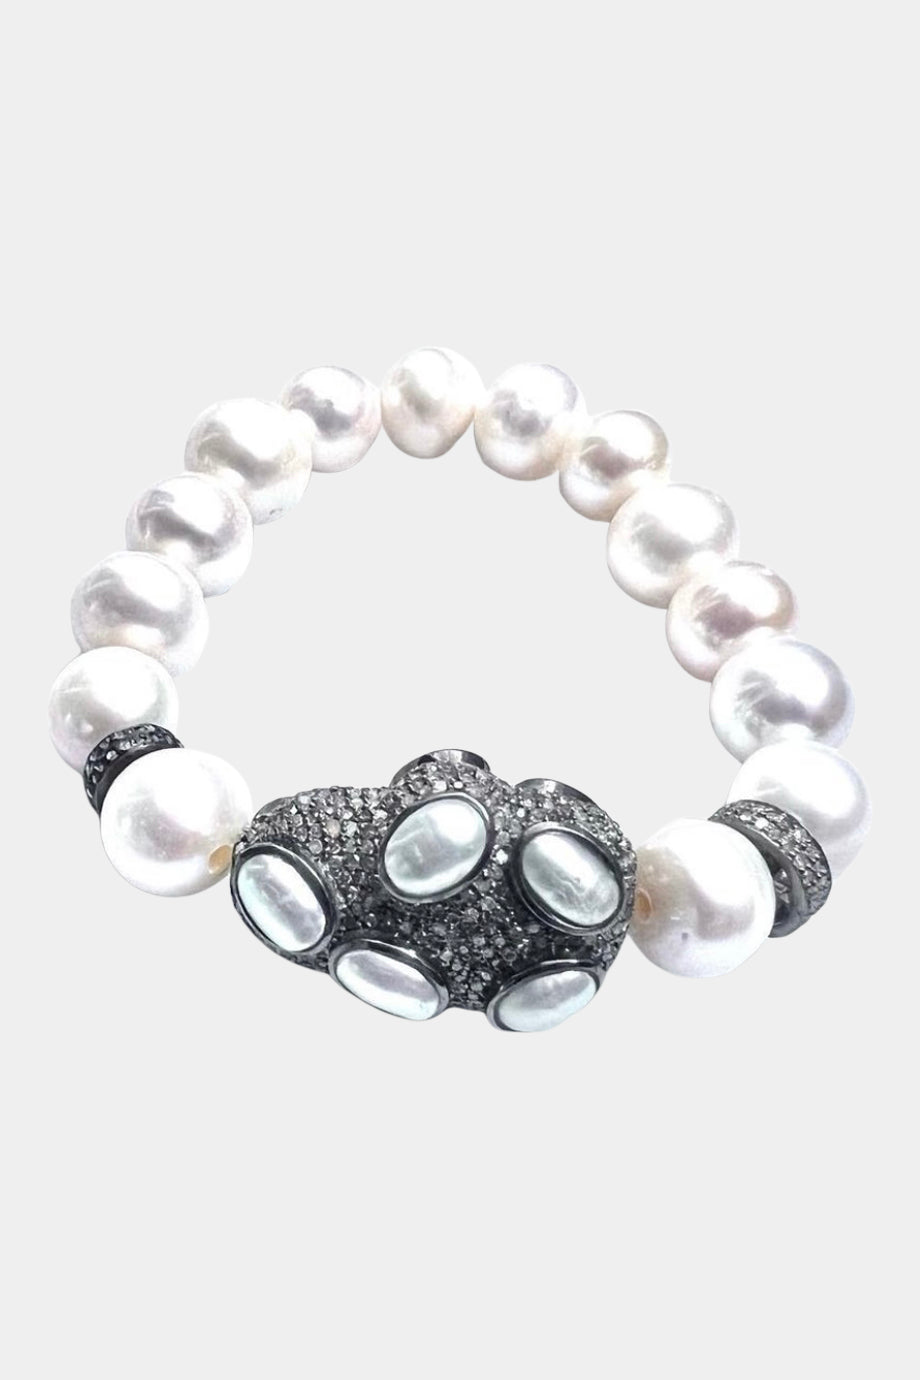 Pearl Bracelet, Double Row Diamond Accents, Large Pave Diamond & Pearl Nugget